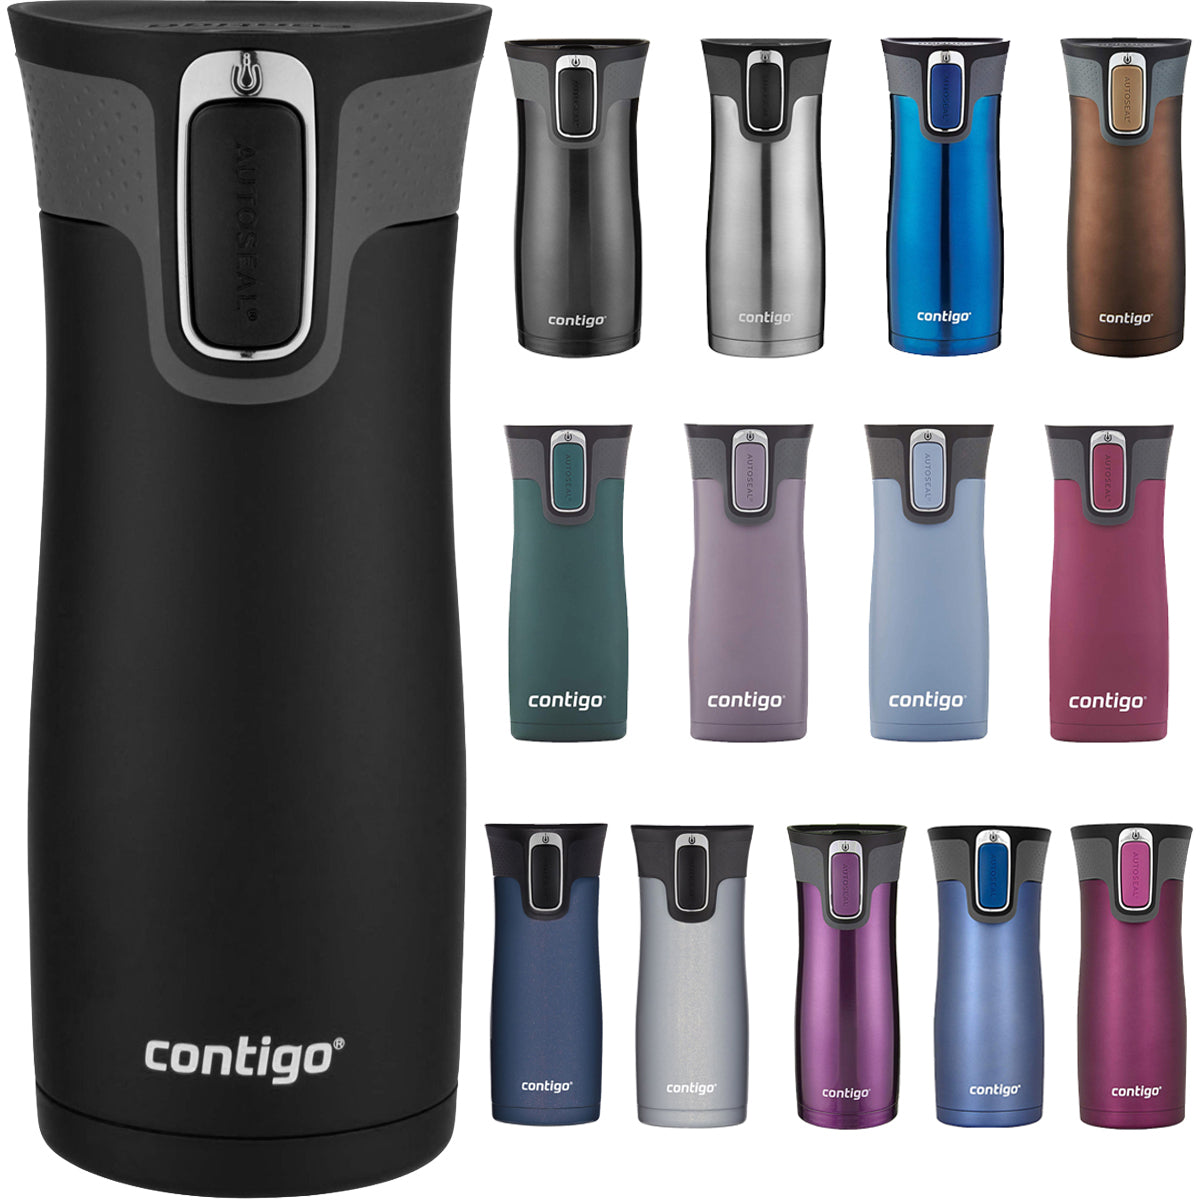  Contigo West Loop Stainless Steel Vacuum-Insulated Travel Mug  with Spill-Proof Lid, Keeps Drinks Hot up to 5 Hours and Cold up to 12  Hours, 16oz 2-Pack, Brown Sugar & Chocolate Truffle